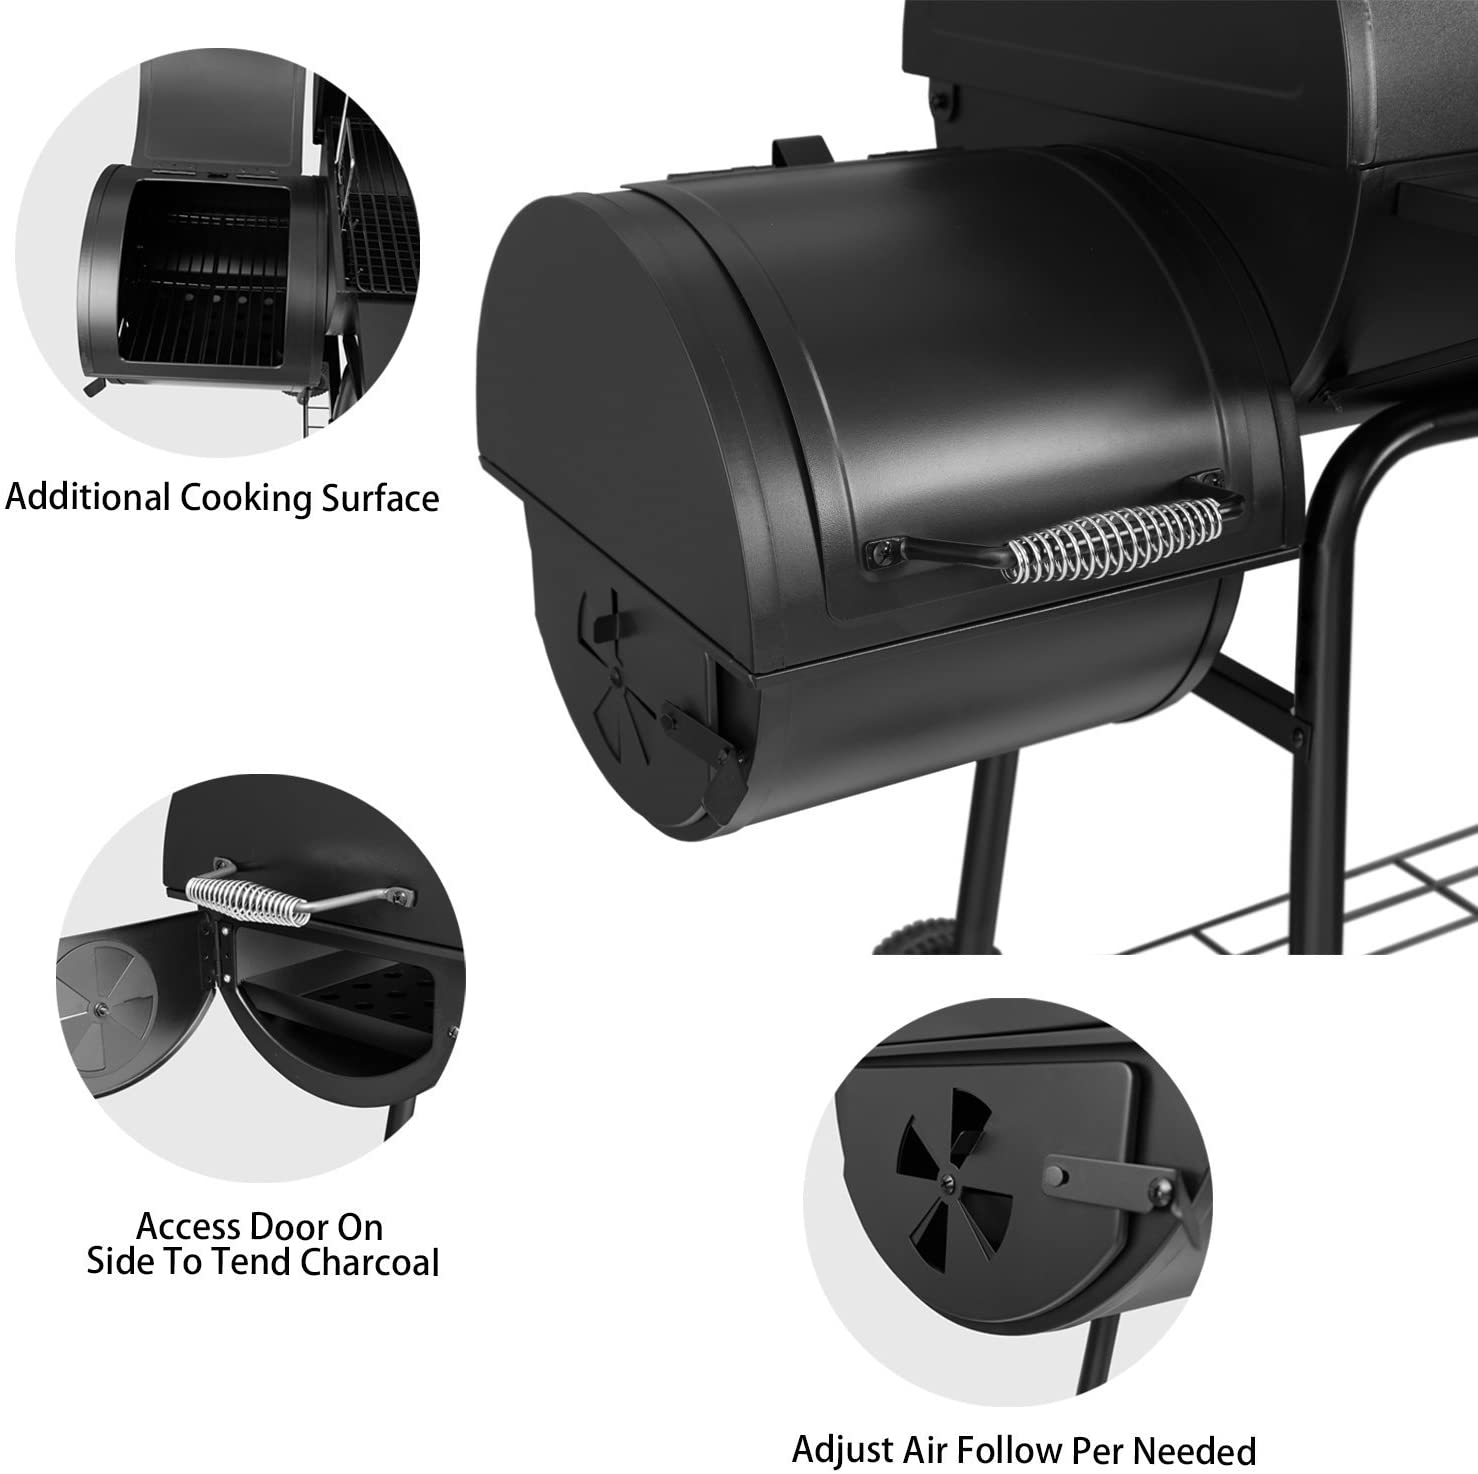 Royal Gourmet BBQ Charcoal Grill and Offset Smoker specifications